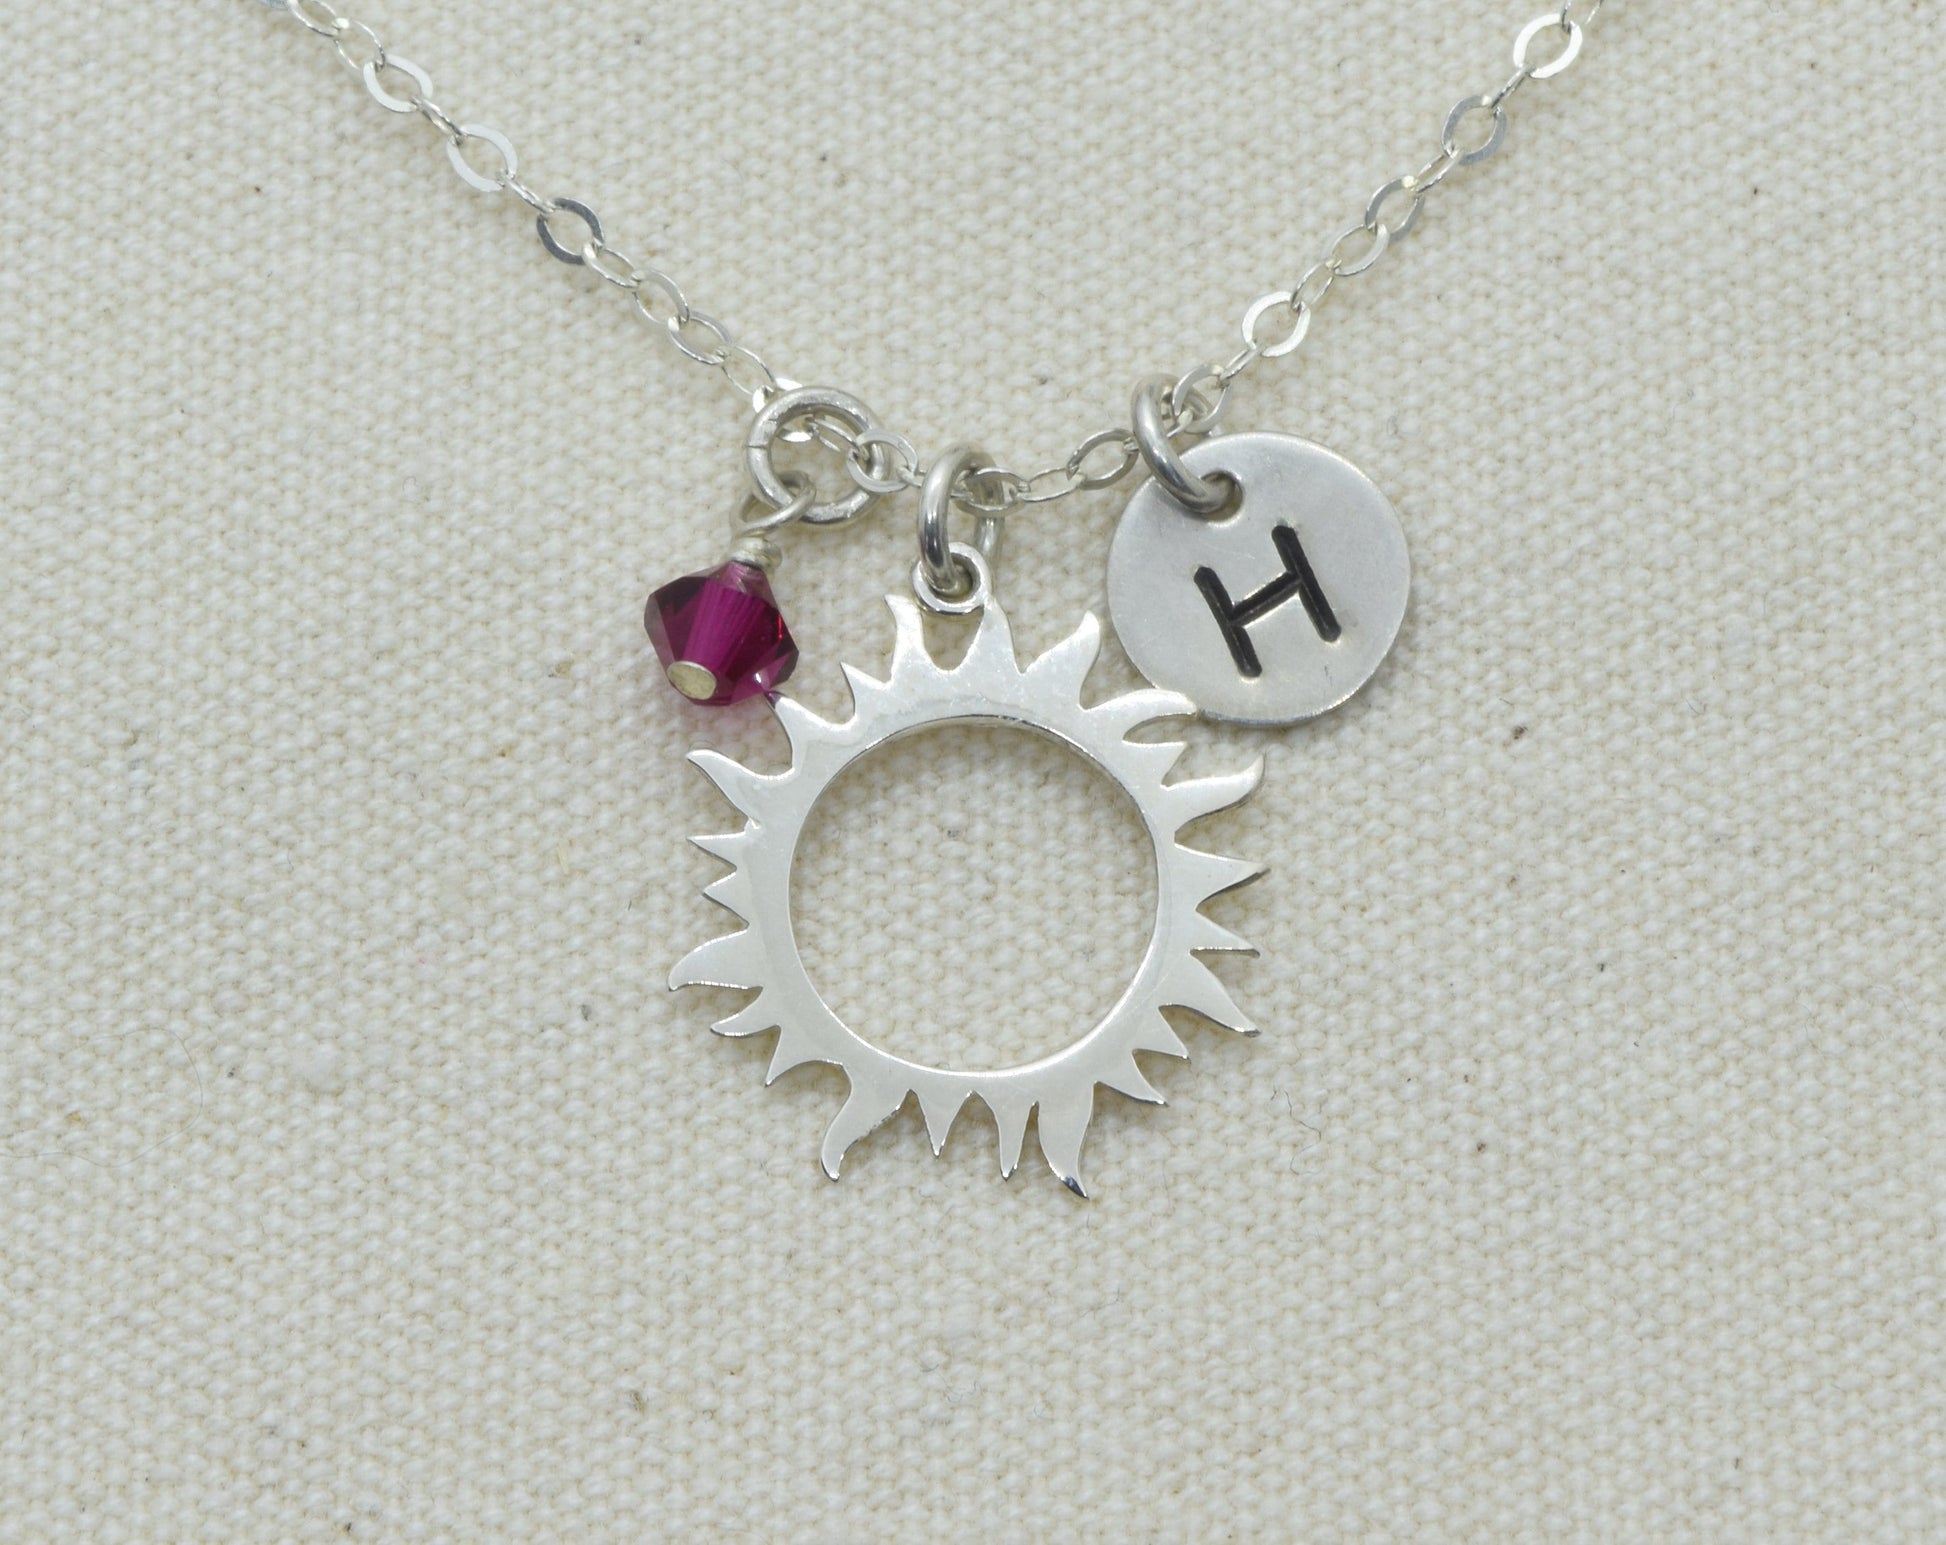 Sterling Silver Eclipse Necklace, Solar Eclipse Pendant, Dainty Sun Necklace, Birthday Gift, Gift of Hope, Open Sun Charm